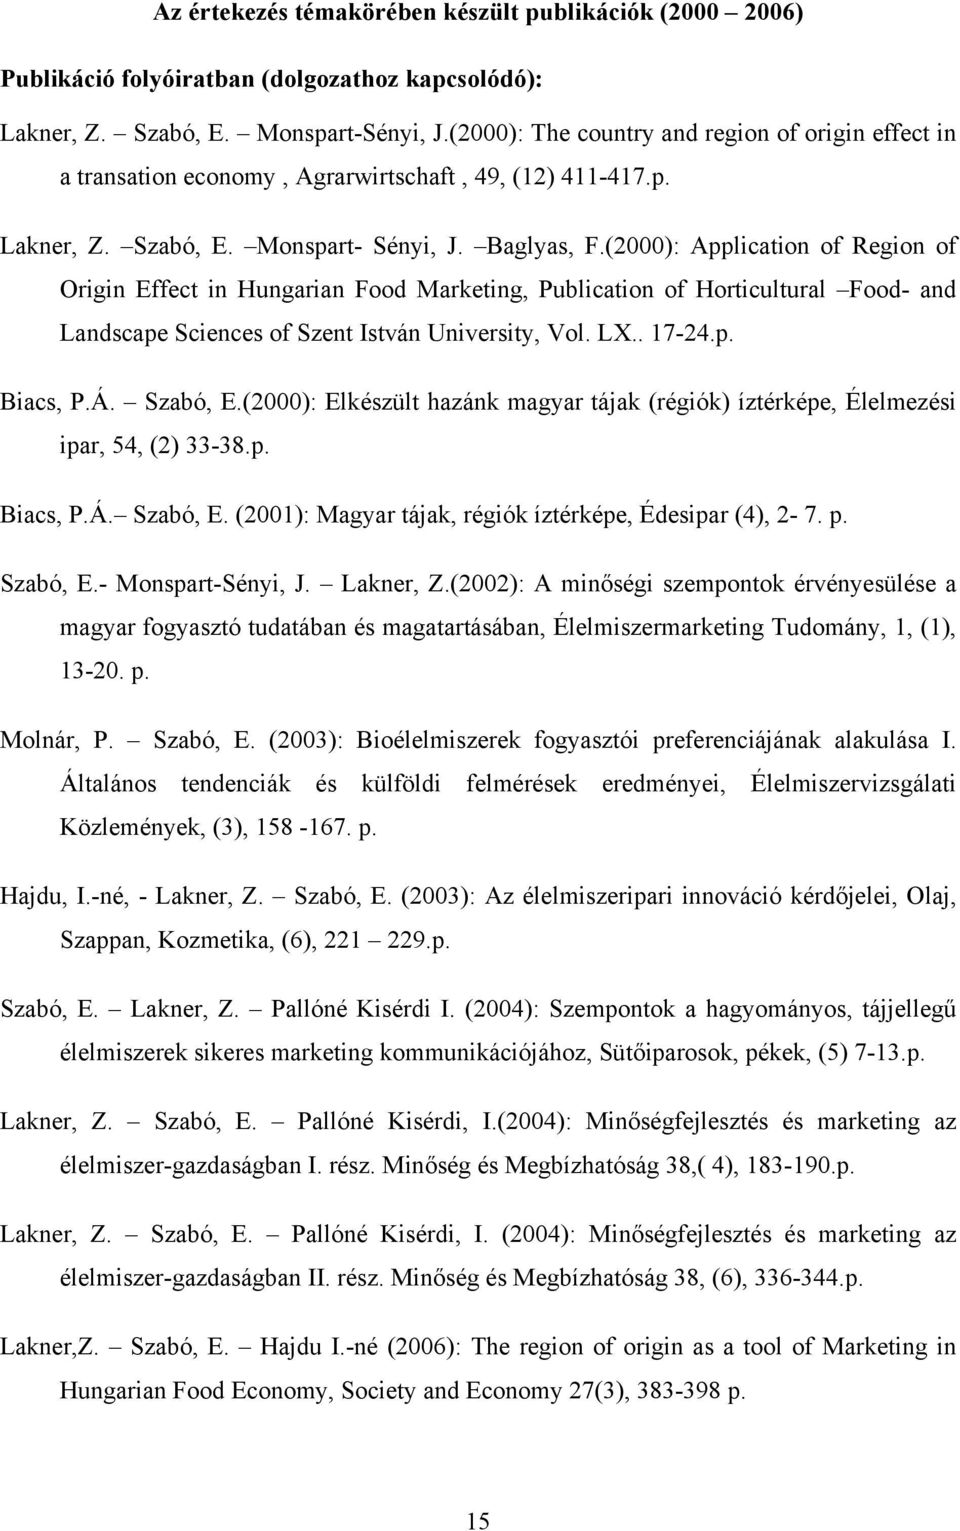 (2000): Application of Region of Origin Effect in Hungarian Food Marketing, Publication of Horticultural Food- and Landscape Sciences of Szent István University, Vol. LX.. 17-24.p. Biacs, P.Á.